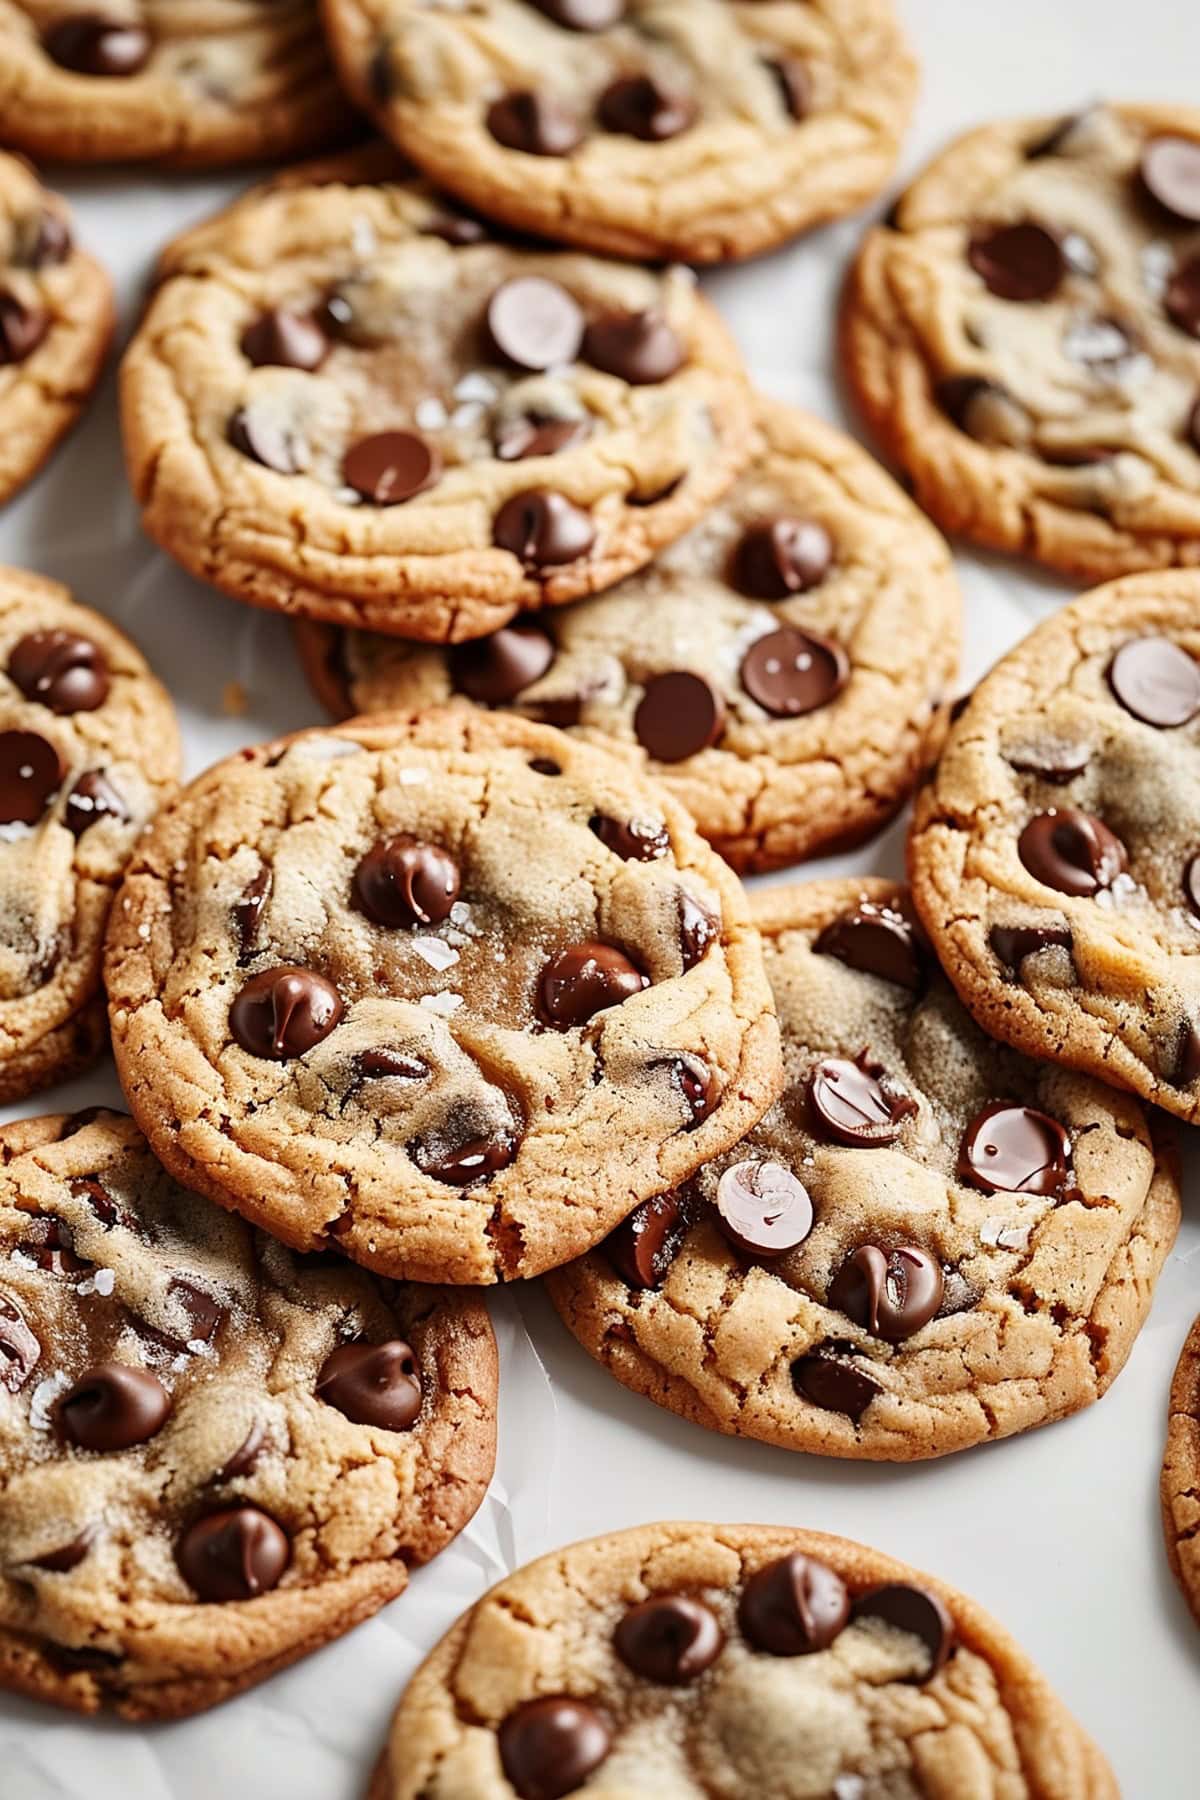 Pile of Gooey Brown Butter Chocolate Chip Cookies on Parchment Paper